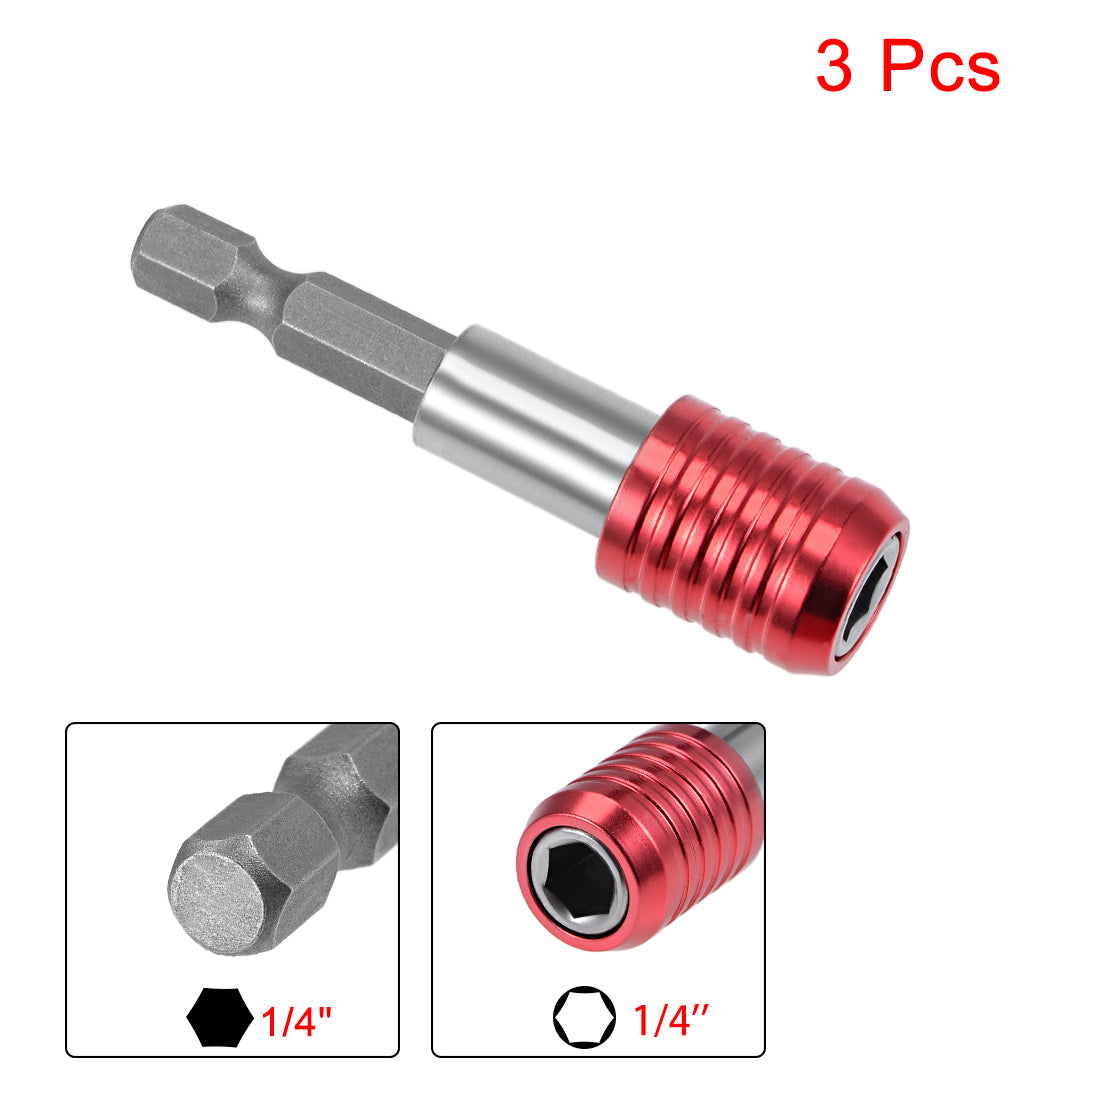 uxcell Uxcell Extension Extend Socket Drill Bit Holder, Magnetic Hex Screwdriver Power Tools ,2.4/ 4/ 6-inch Length,1/4''-Hexagon Drill Red 3pcs